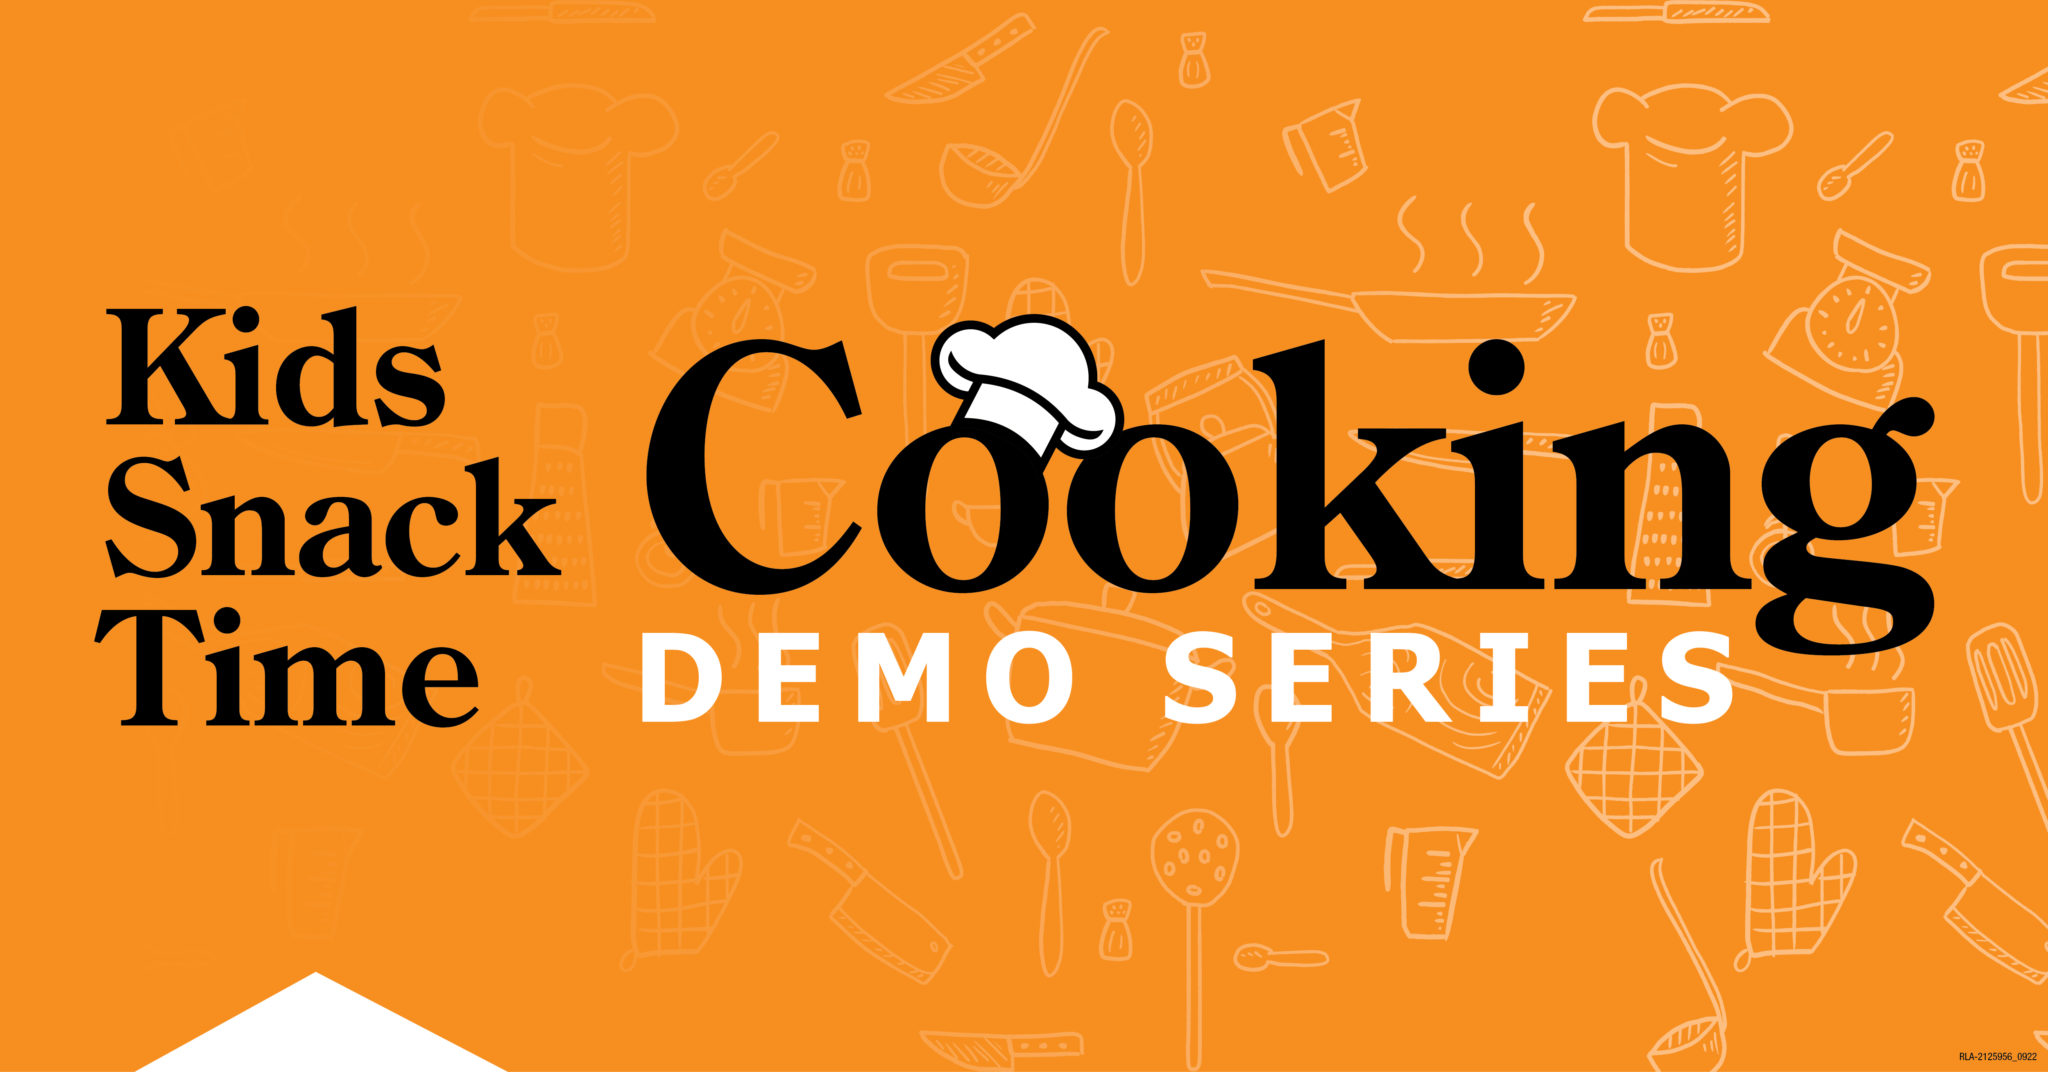 Demo Series Kids Snack Time Cooking